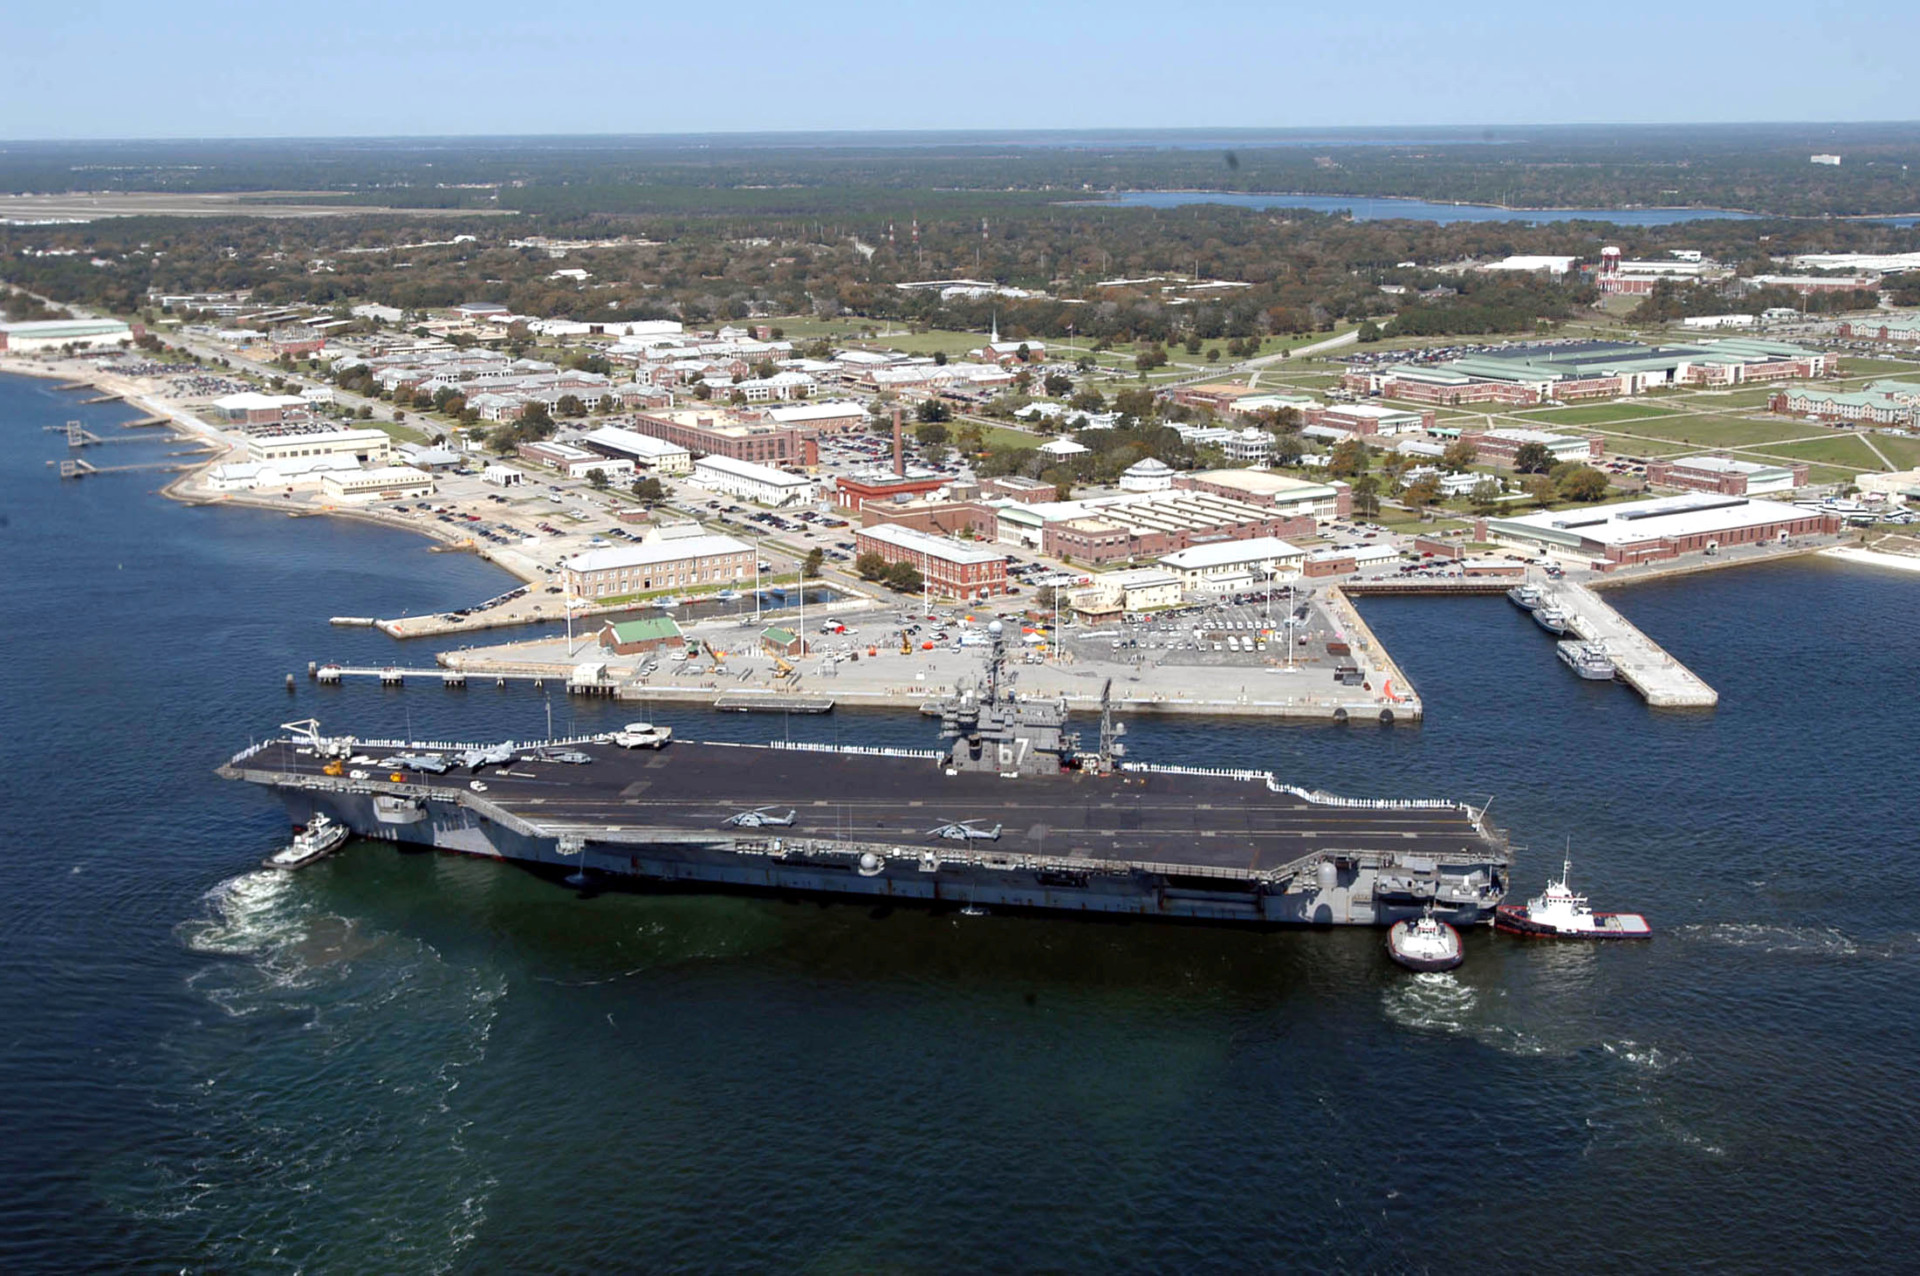 The aircraft carrier USS John F. Kennedy arrives for exercises at Naval Air Station Pensacola